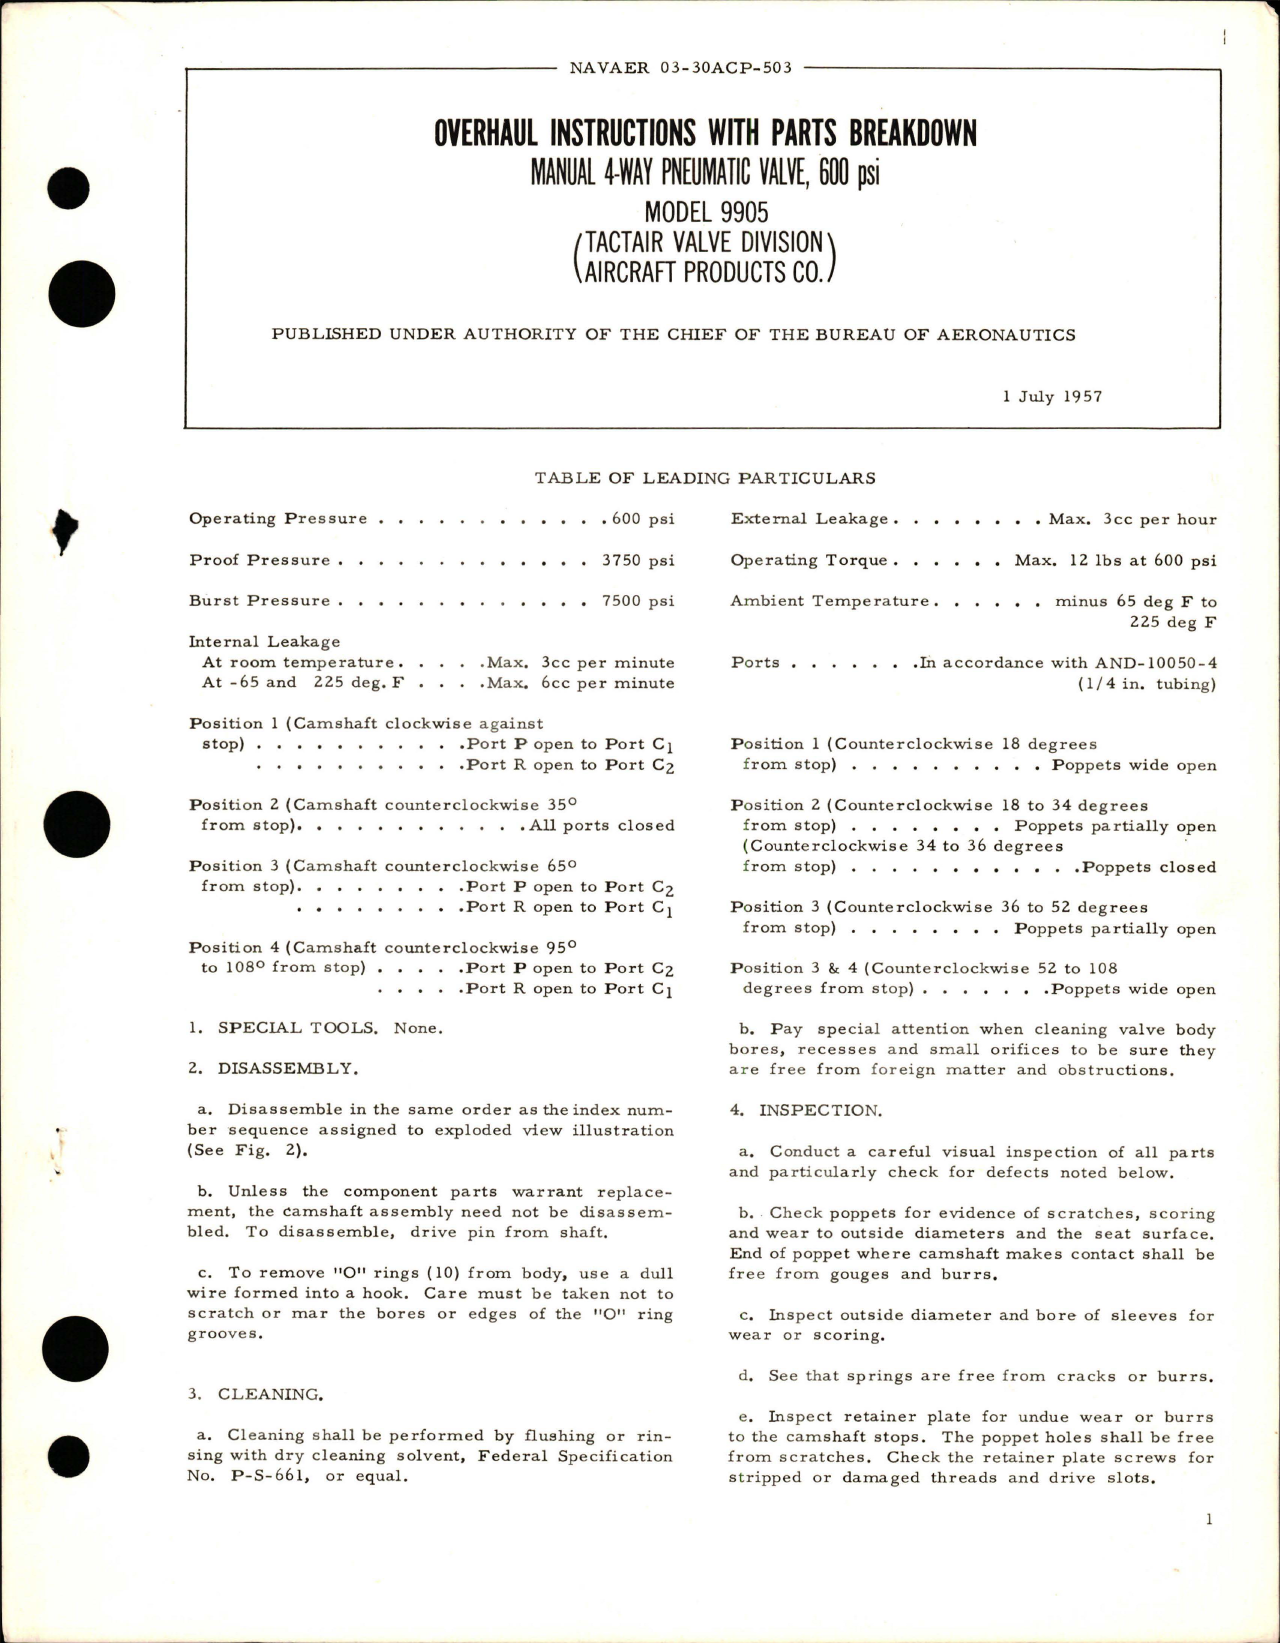 Sample page 1 from AirCorps Library document: Overhaul Instructions with Parts Breakdown for Manual 4-Way Pneumatic Valve - 600PSI - Model 9905